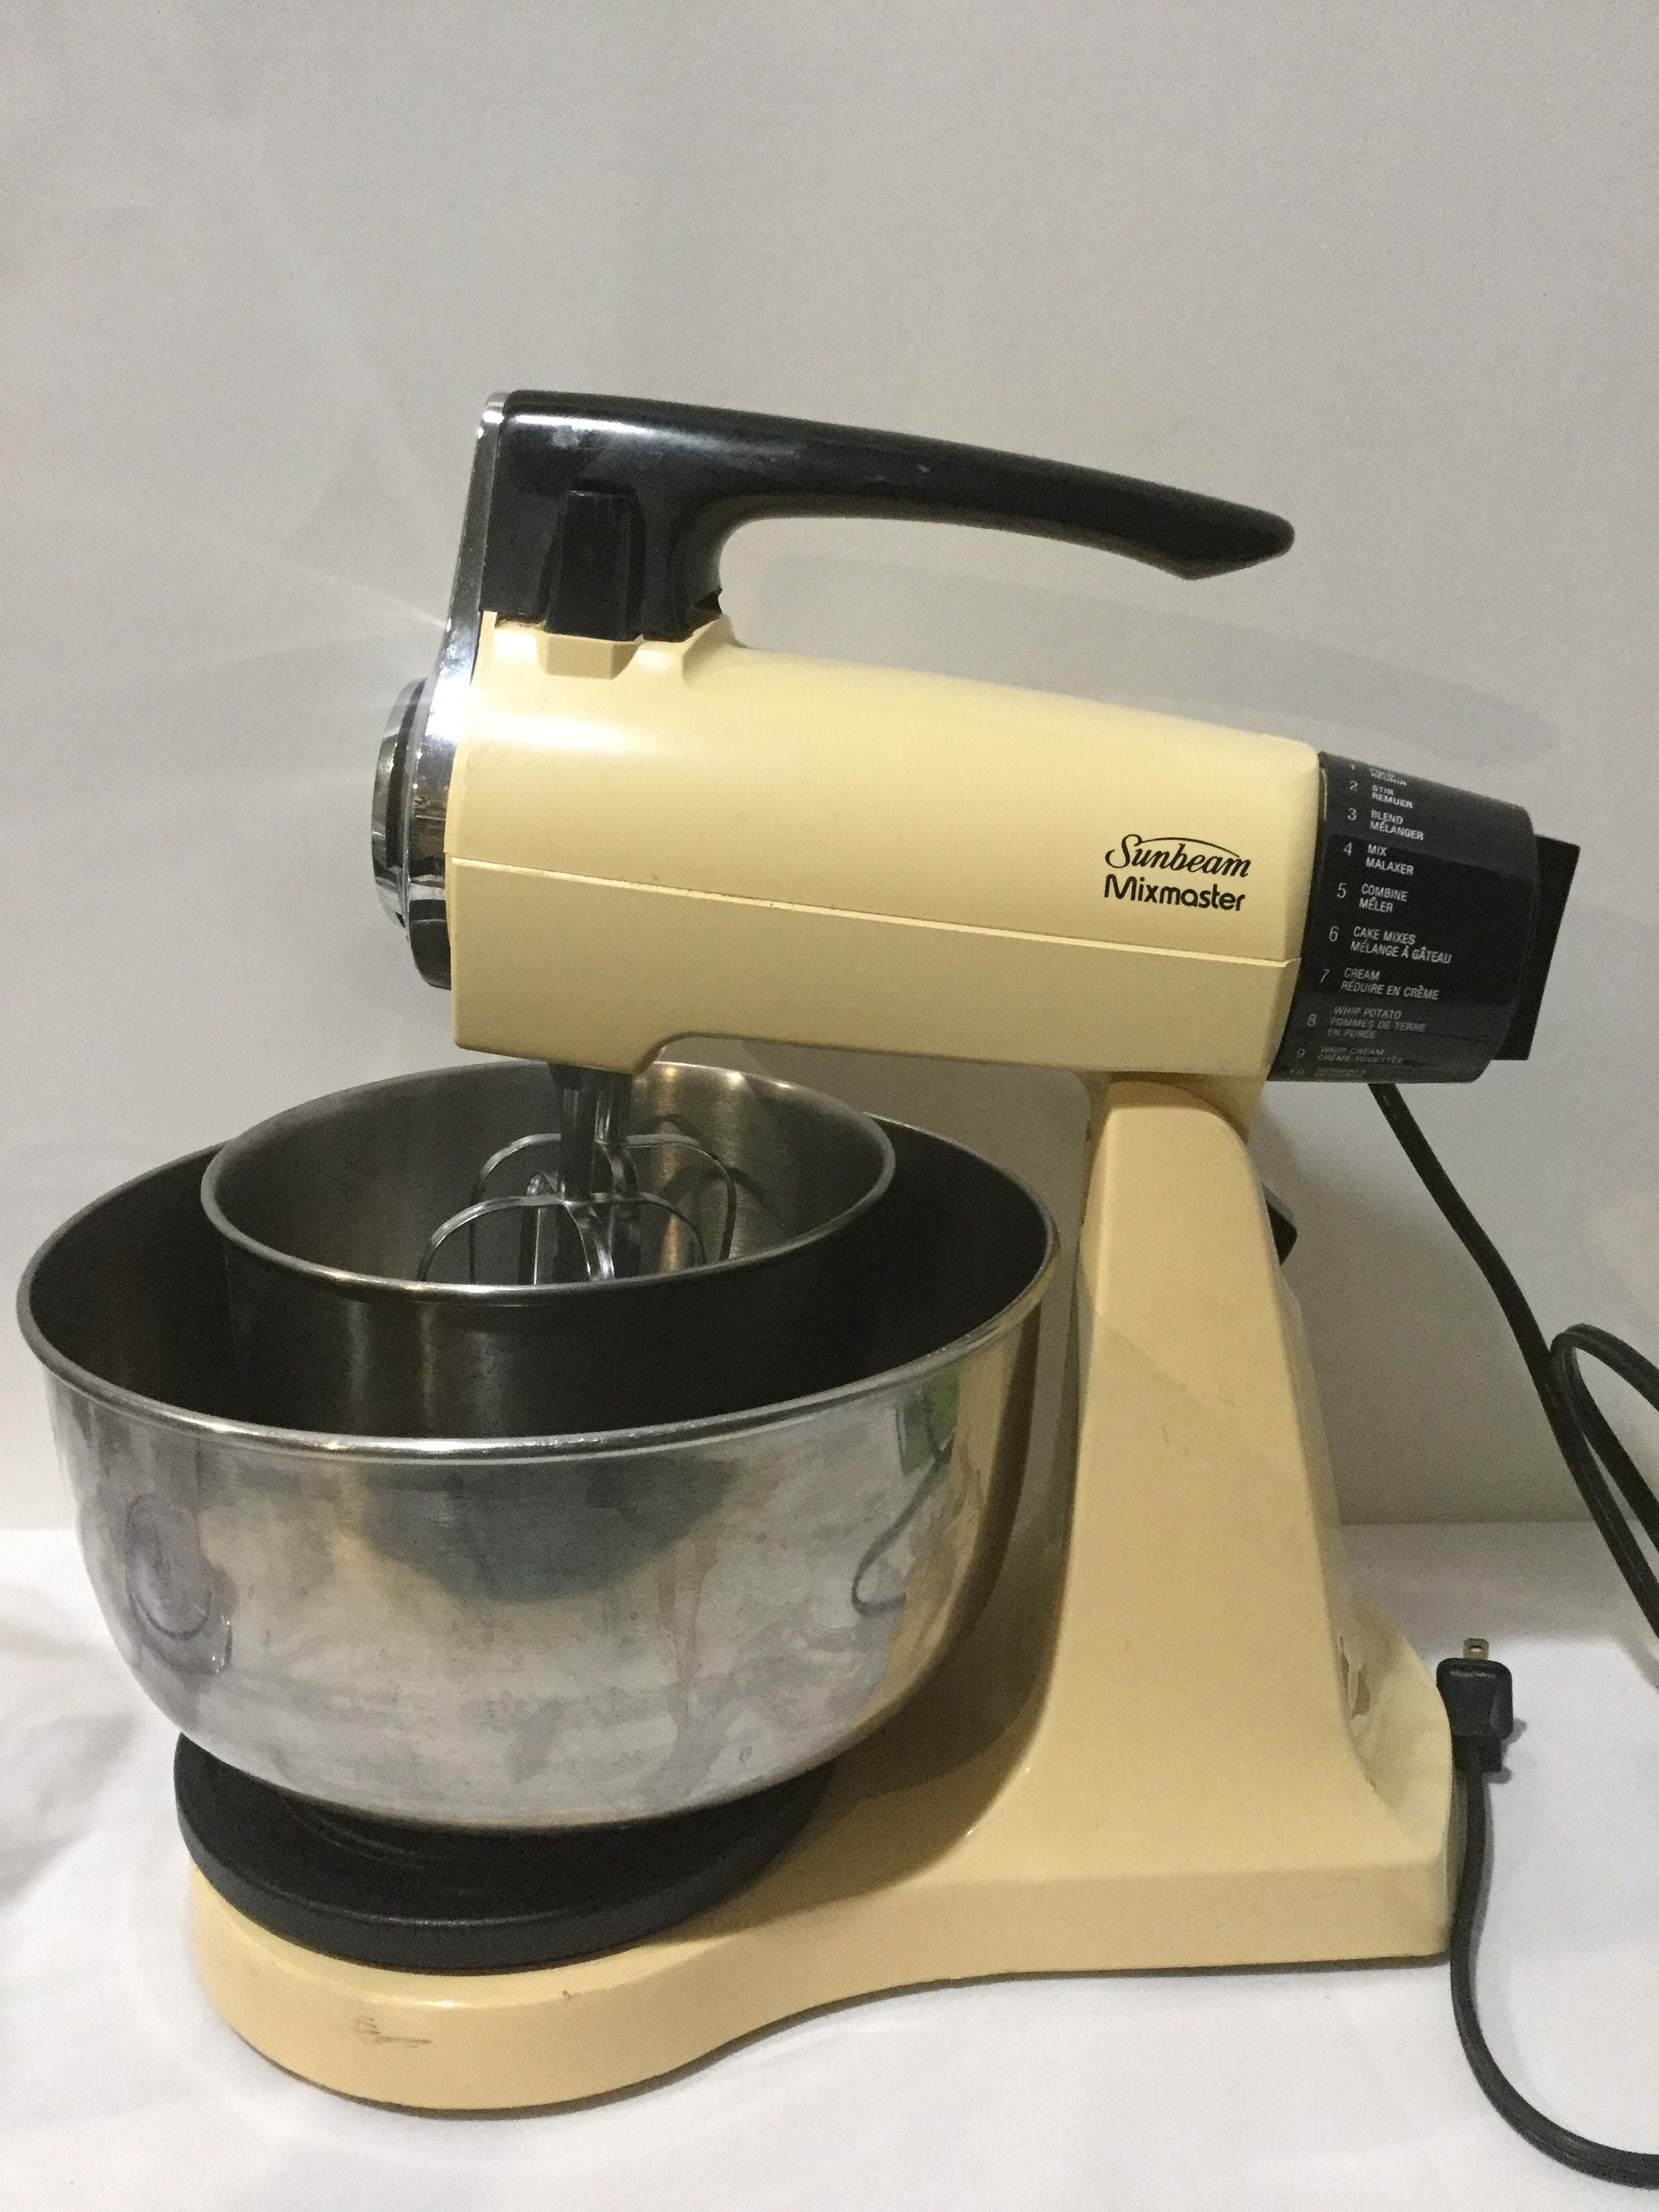 Sunbeam Mixmaster Stand Mixer with Beaters And Glassbake Bowl (Tested)